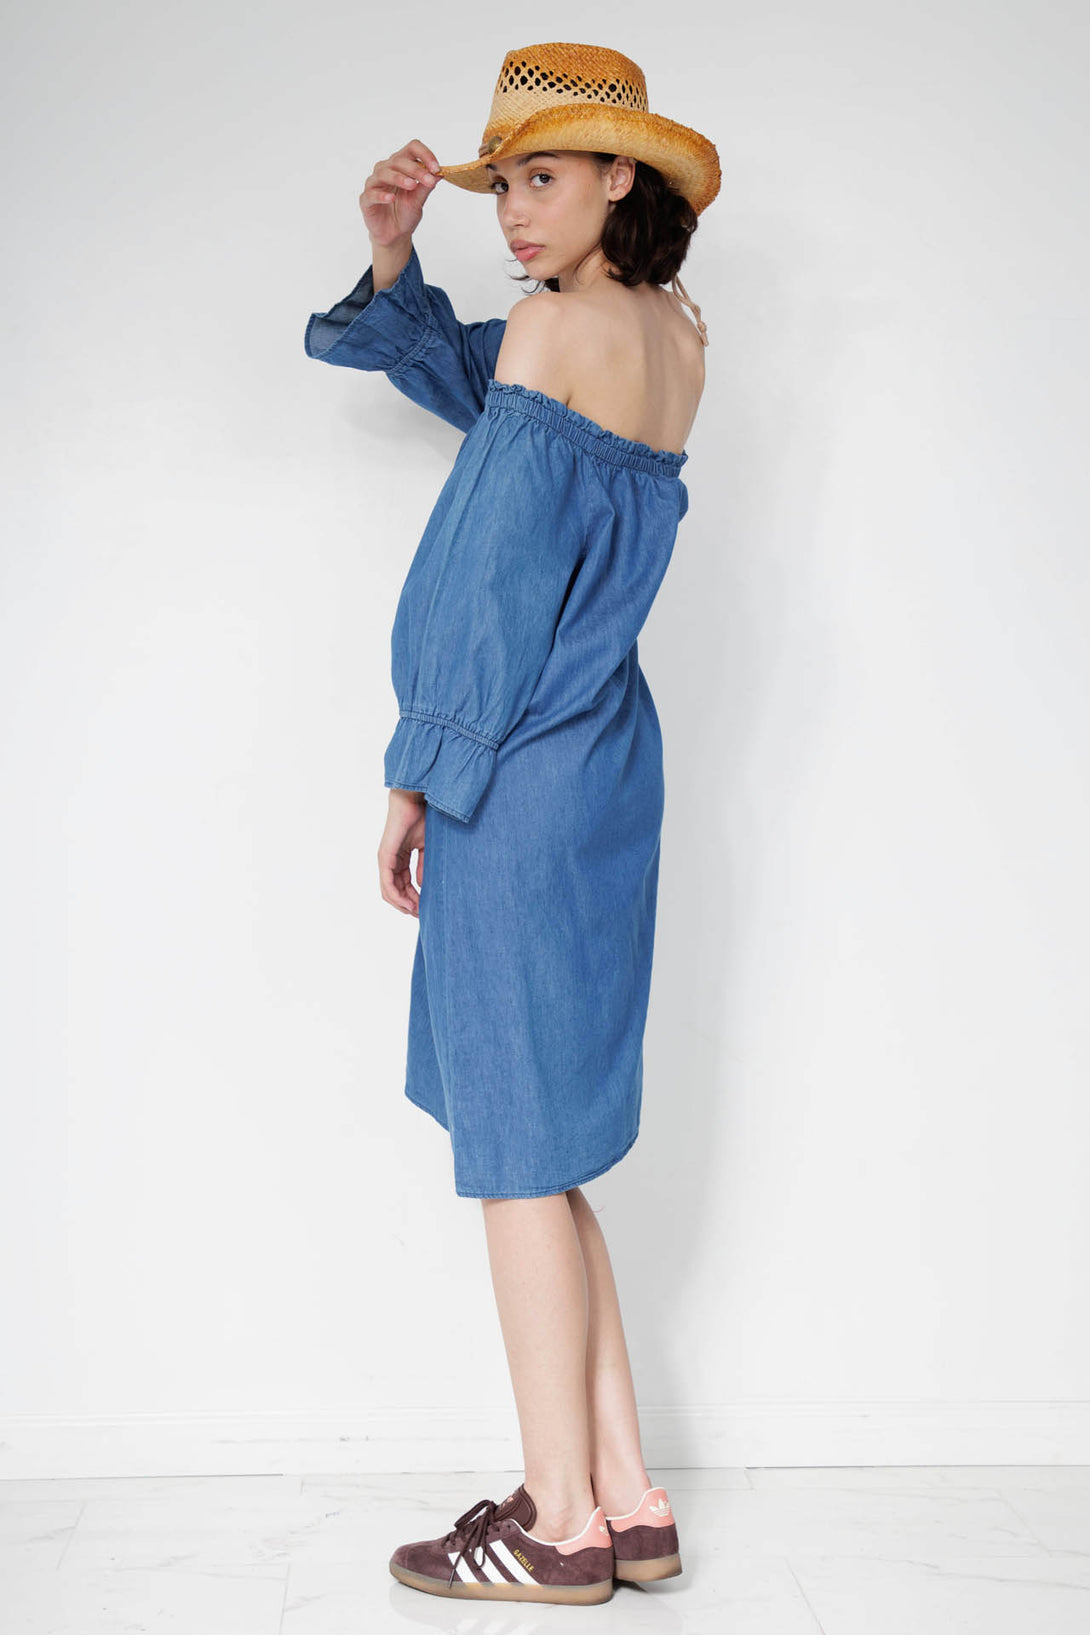 jean dresses for ladies, women's overall dress denim, denim outfit female, HT 360 Collective,